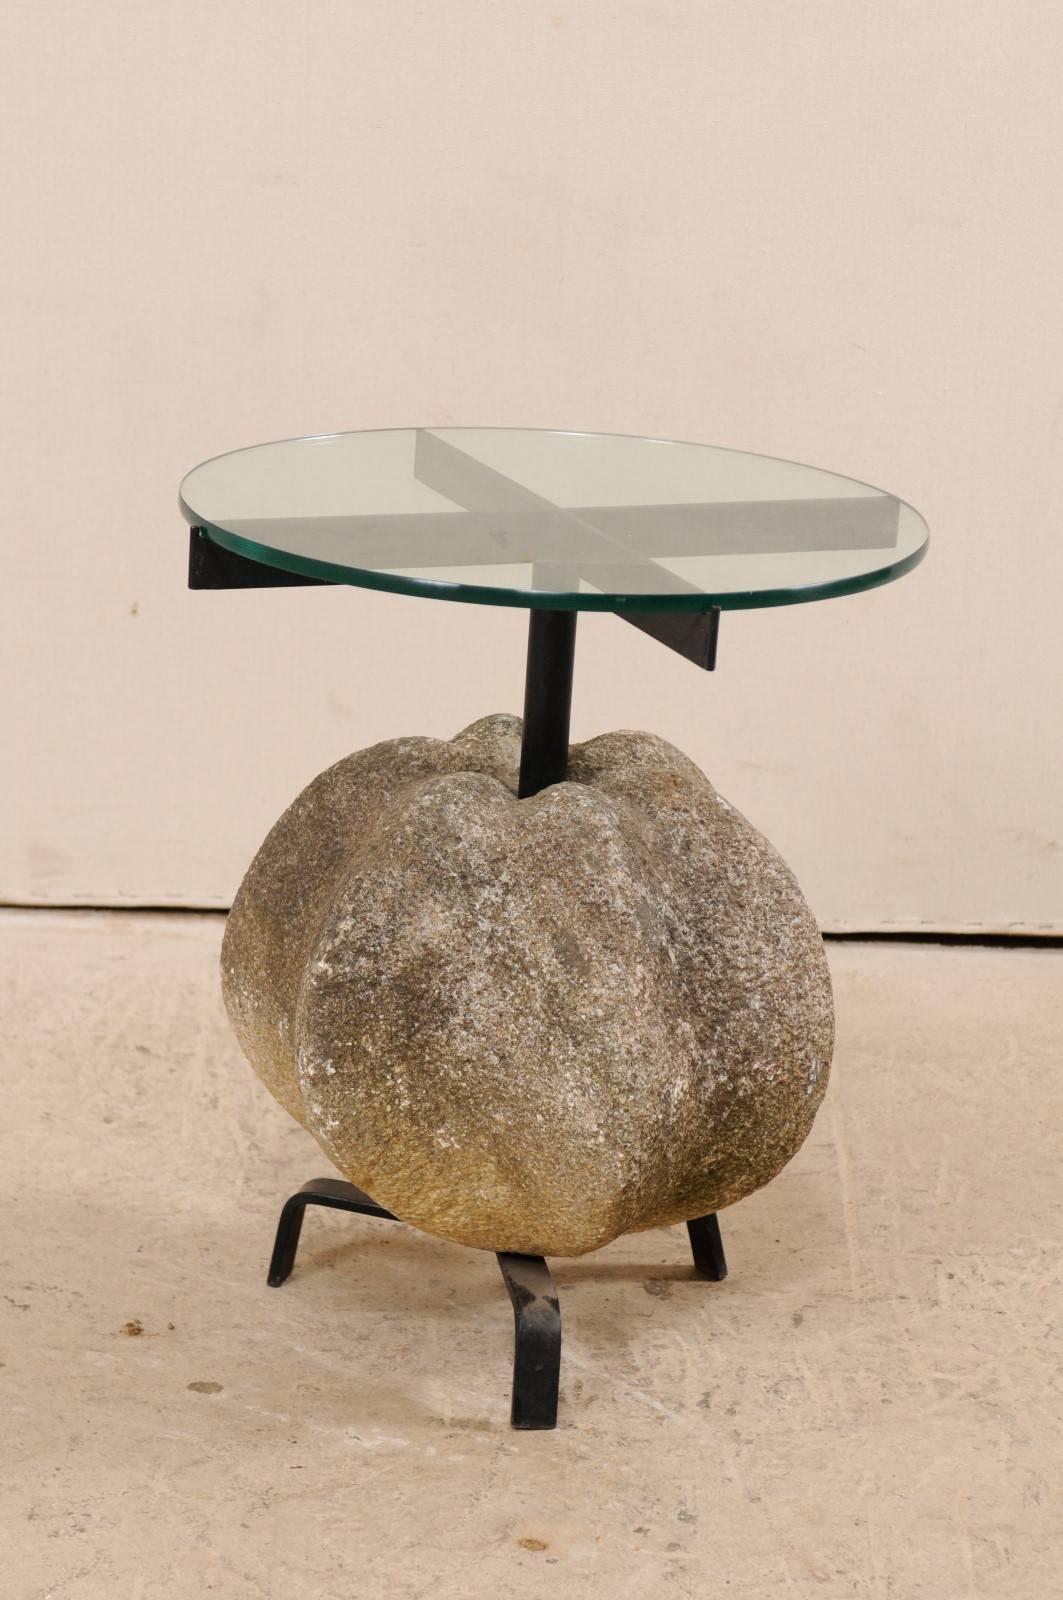 A custom antique stone and glass top side table. This unique side or drinks table features a large antique, segmented sphere-shaped stone which has been mounted onto a custom iron pedestal style base with tripod feet, and a clear circular-shaped